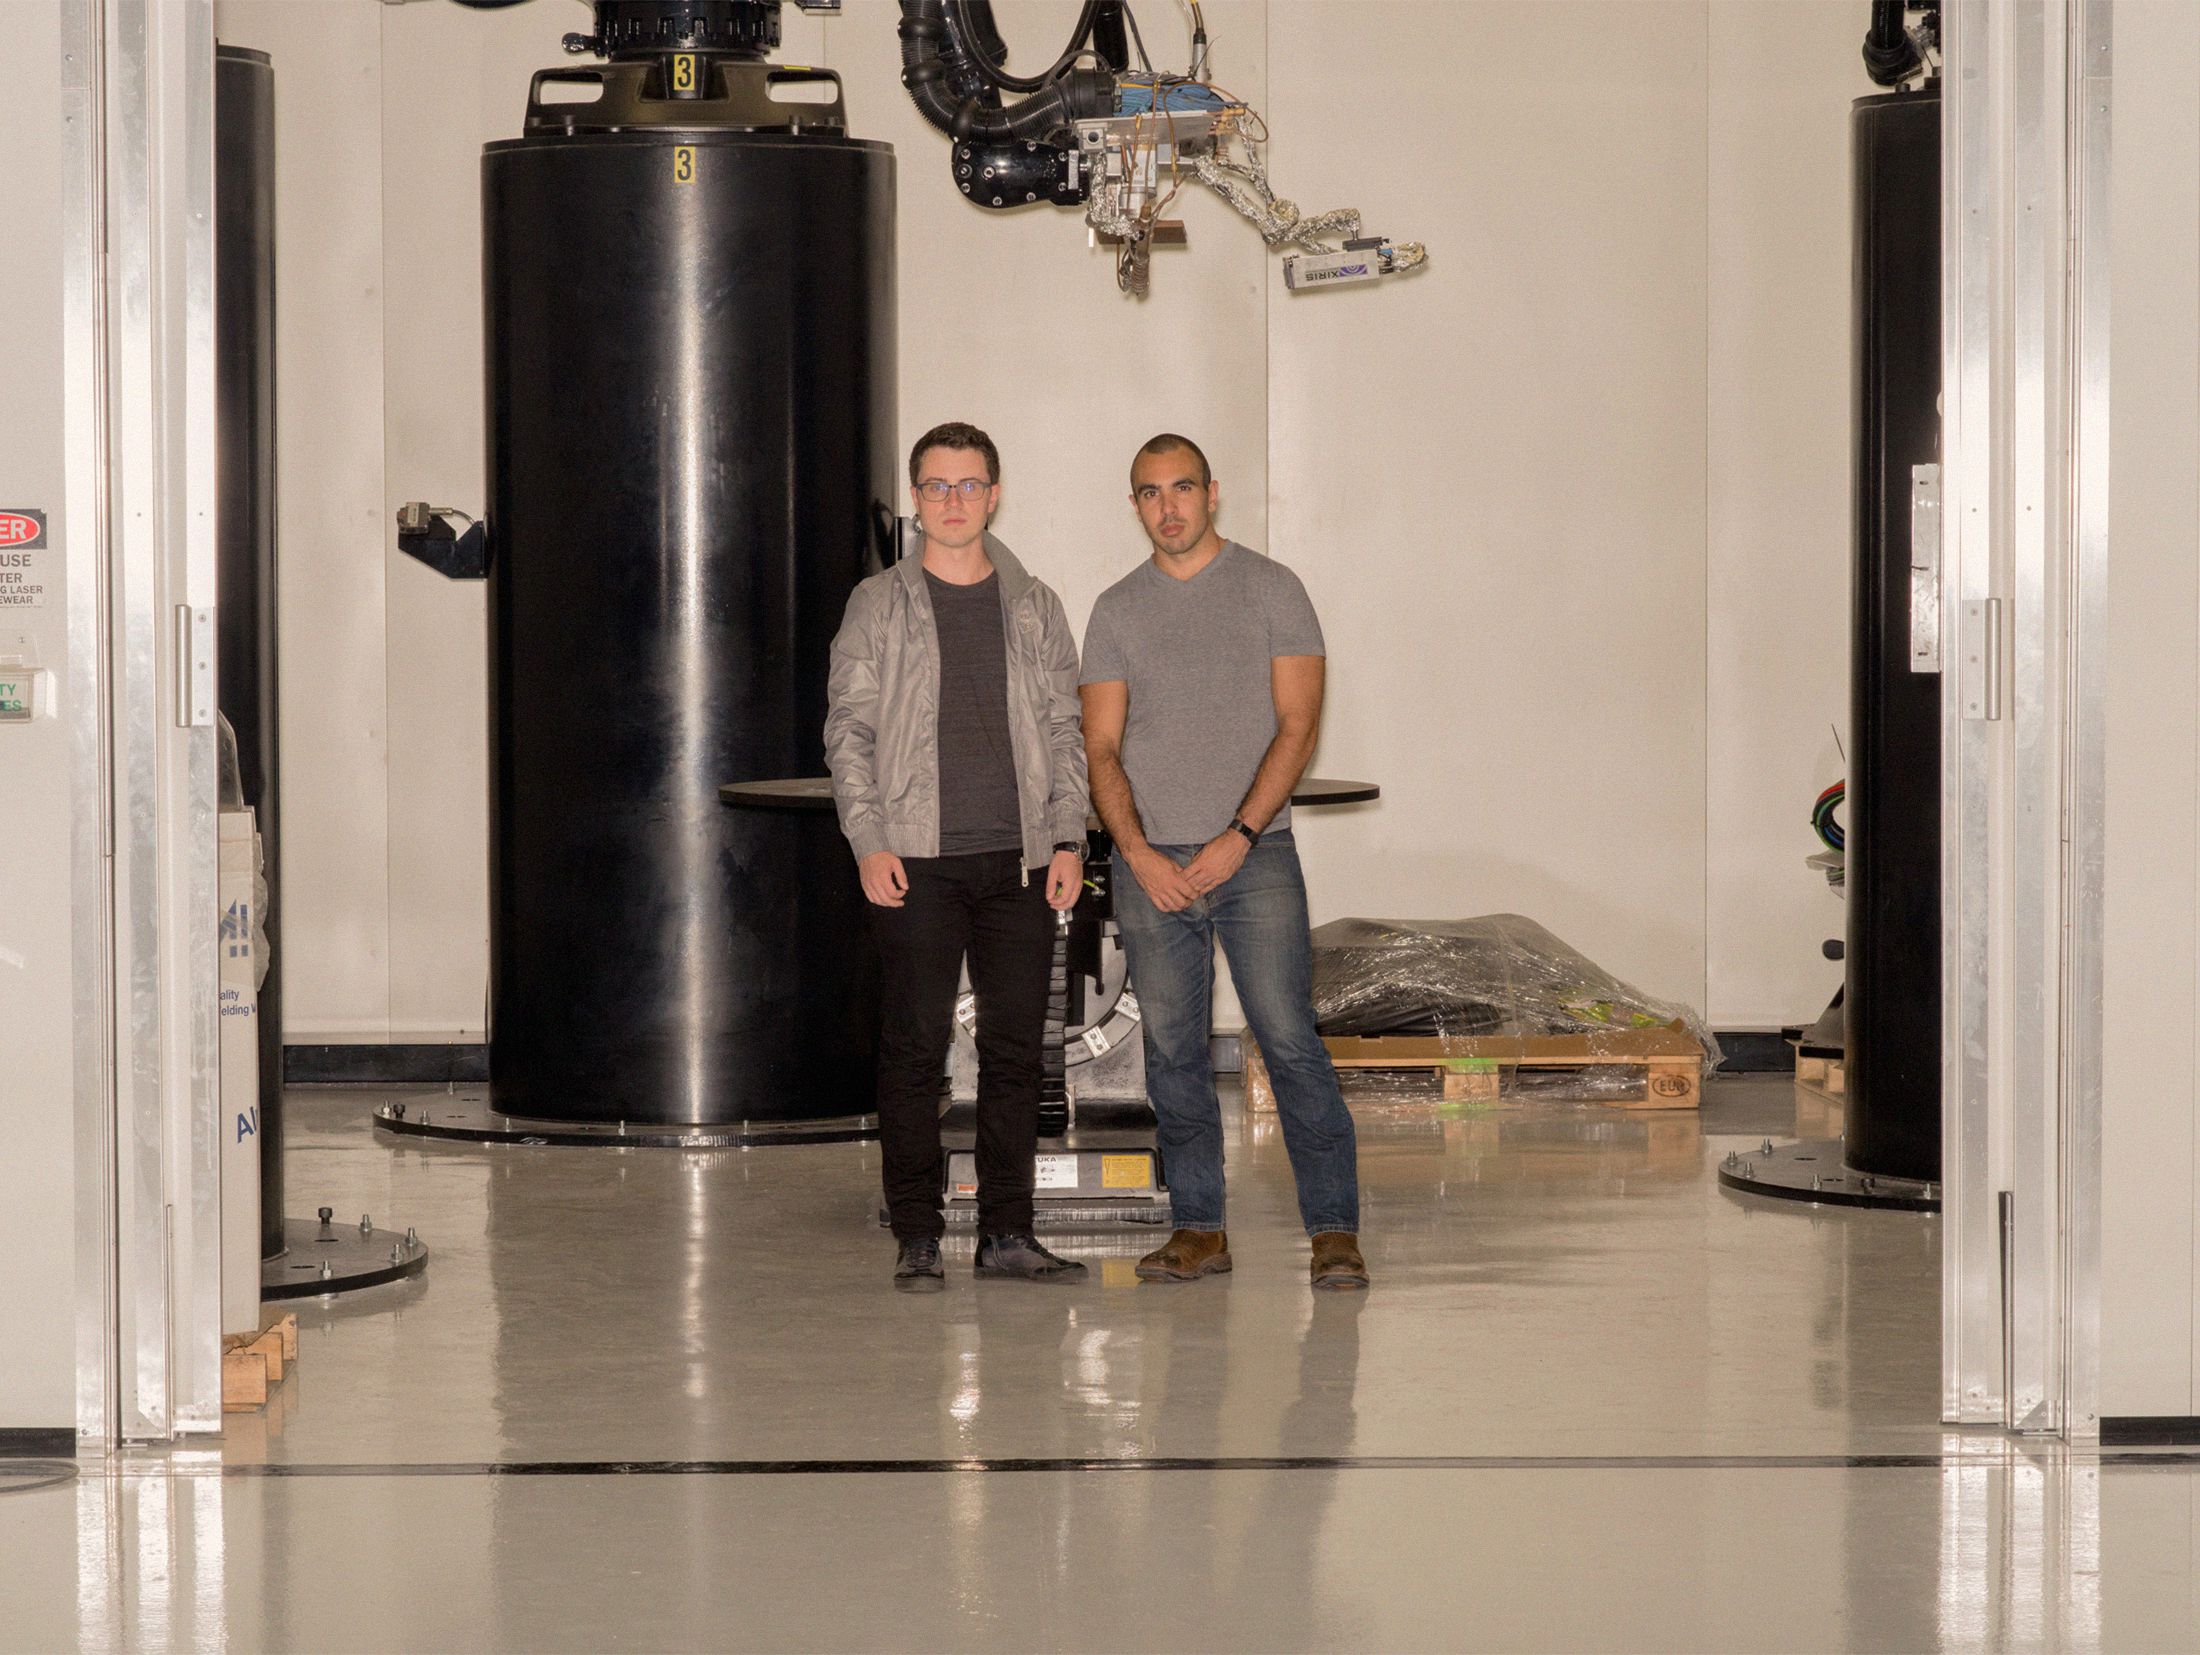 From left, Tim Ellis and Jordan Noone in front of their 3D printer at the Relativity Space headquarters outside Los Angeles.